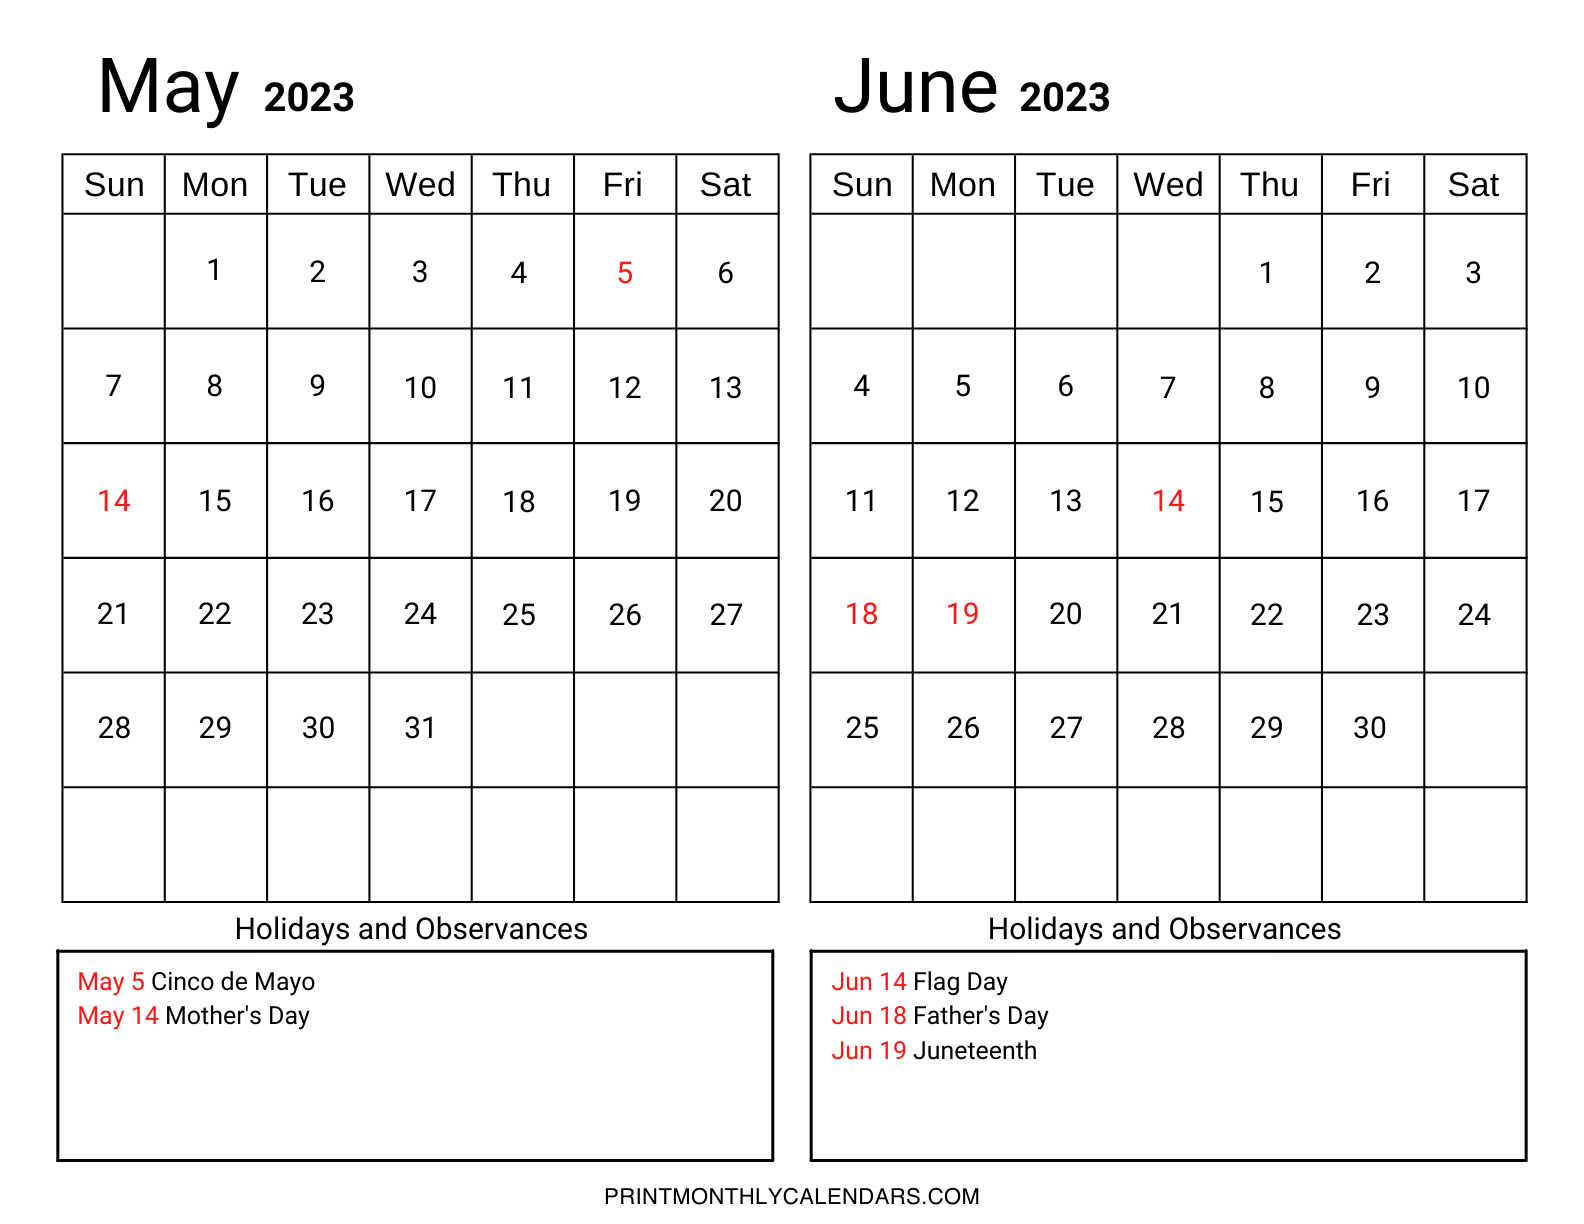 The calendar template for May and June 2023 includes a list of US holidays and observances at the bottom of the grid. On one page, both months are displayed in landscape format.